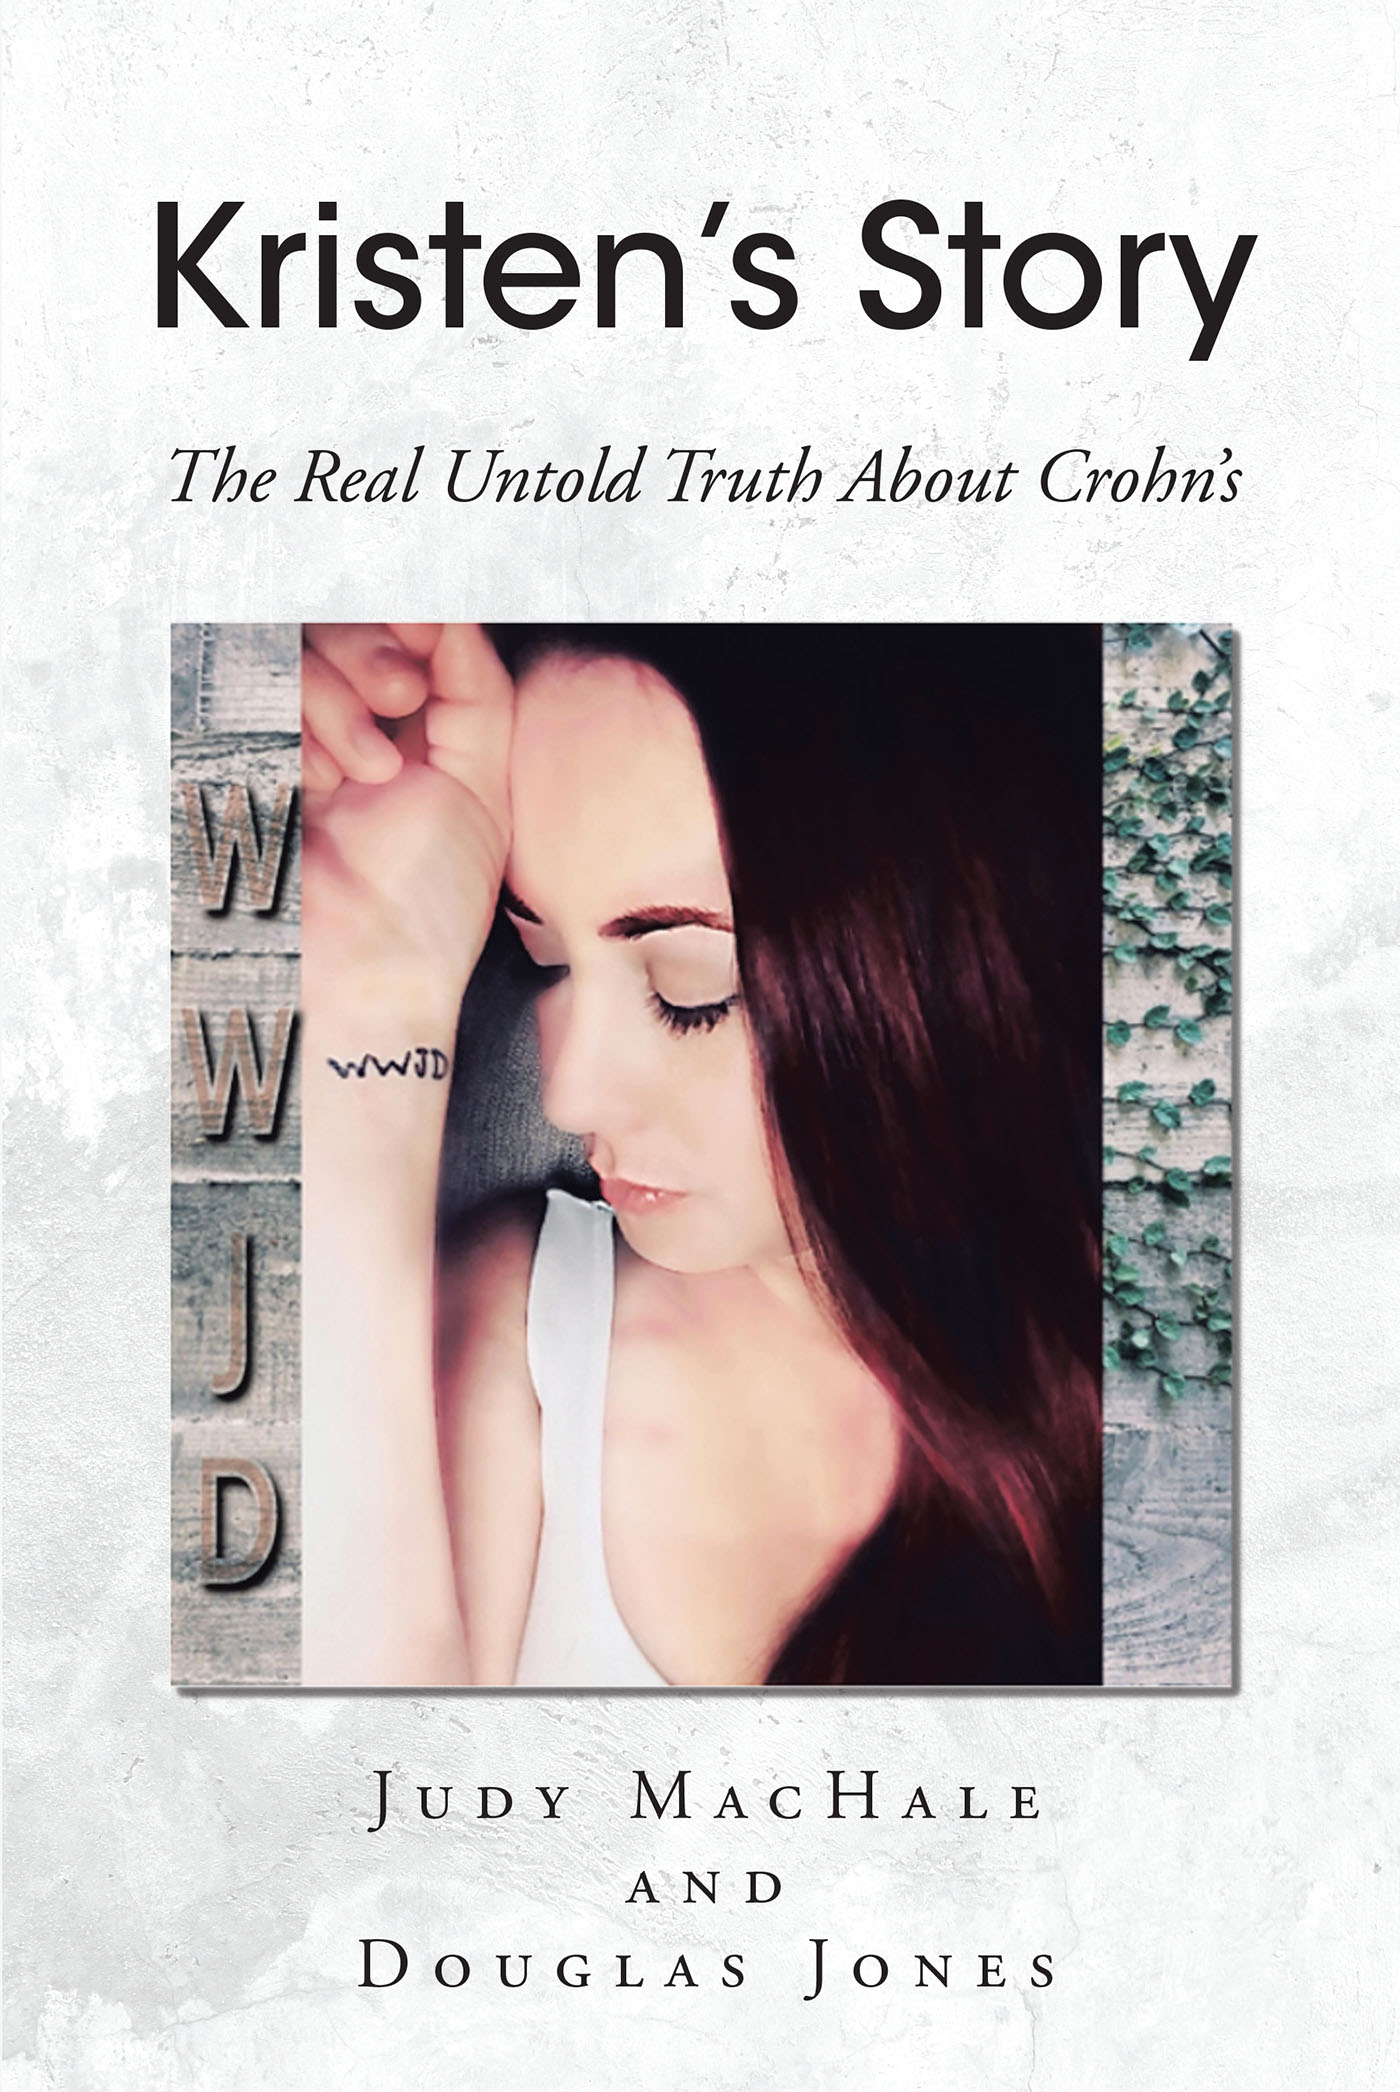 Judy MacHale and Douglas Jones’s Newly Released “KRISTEN’S STORY: The Real Untold Truth About Crohn’s” is a Personal Account of a Devastating Disease